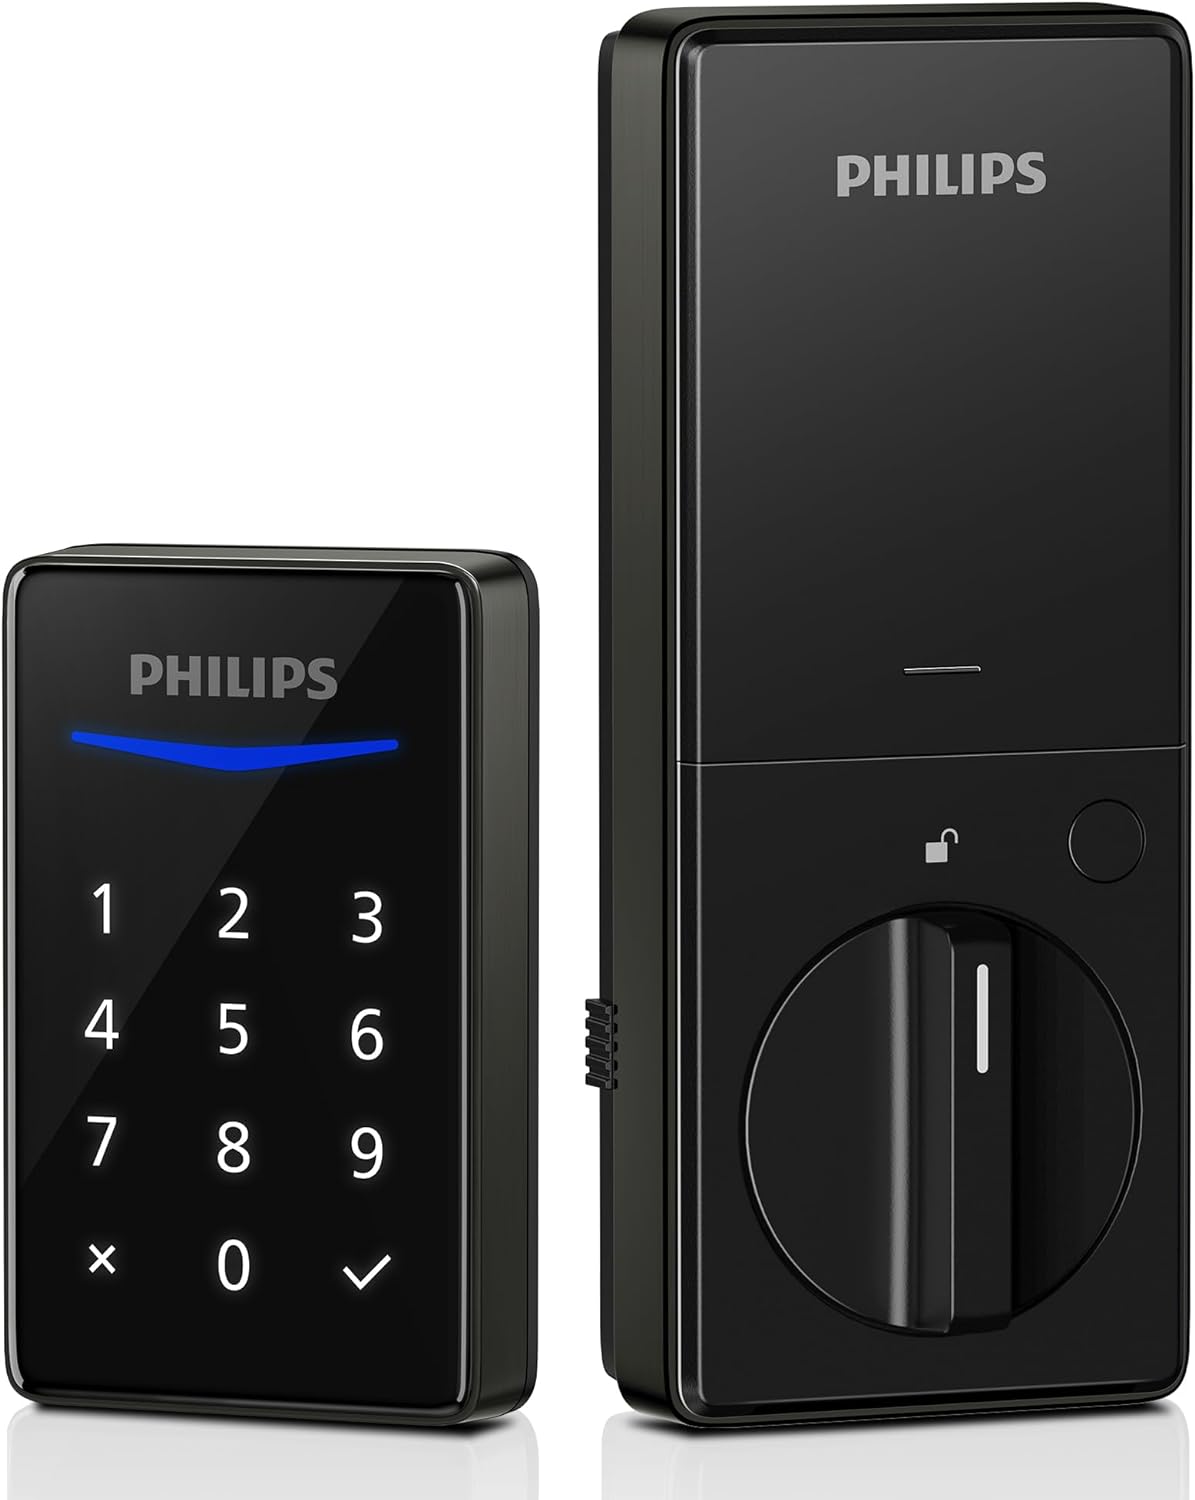 Philips Keyless Entry Door Lock - Generate One-time Code Remotely Nonconnected- Touchscreen Keypad Standalone Deadbolt Lock - Polished Black